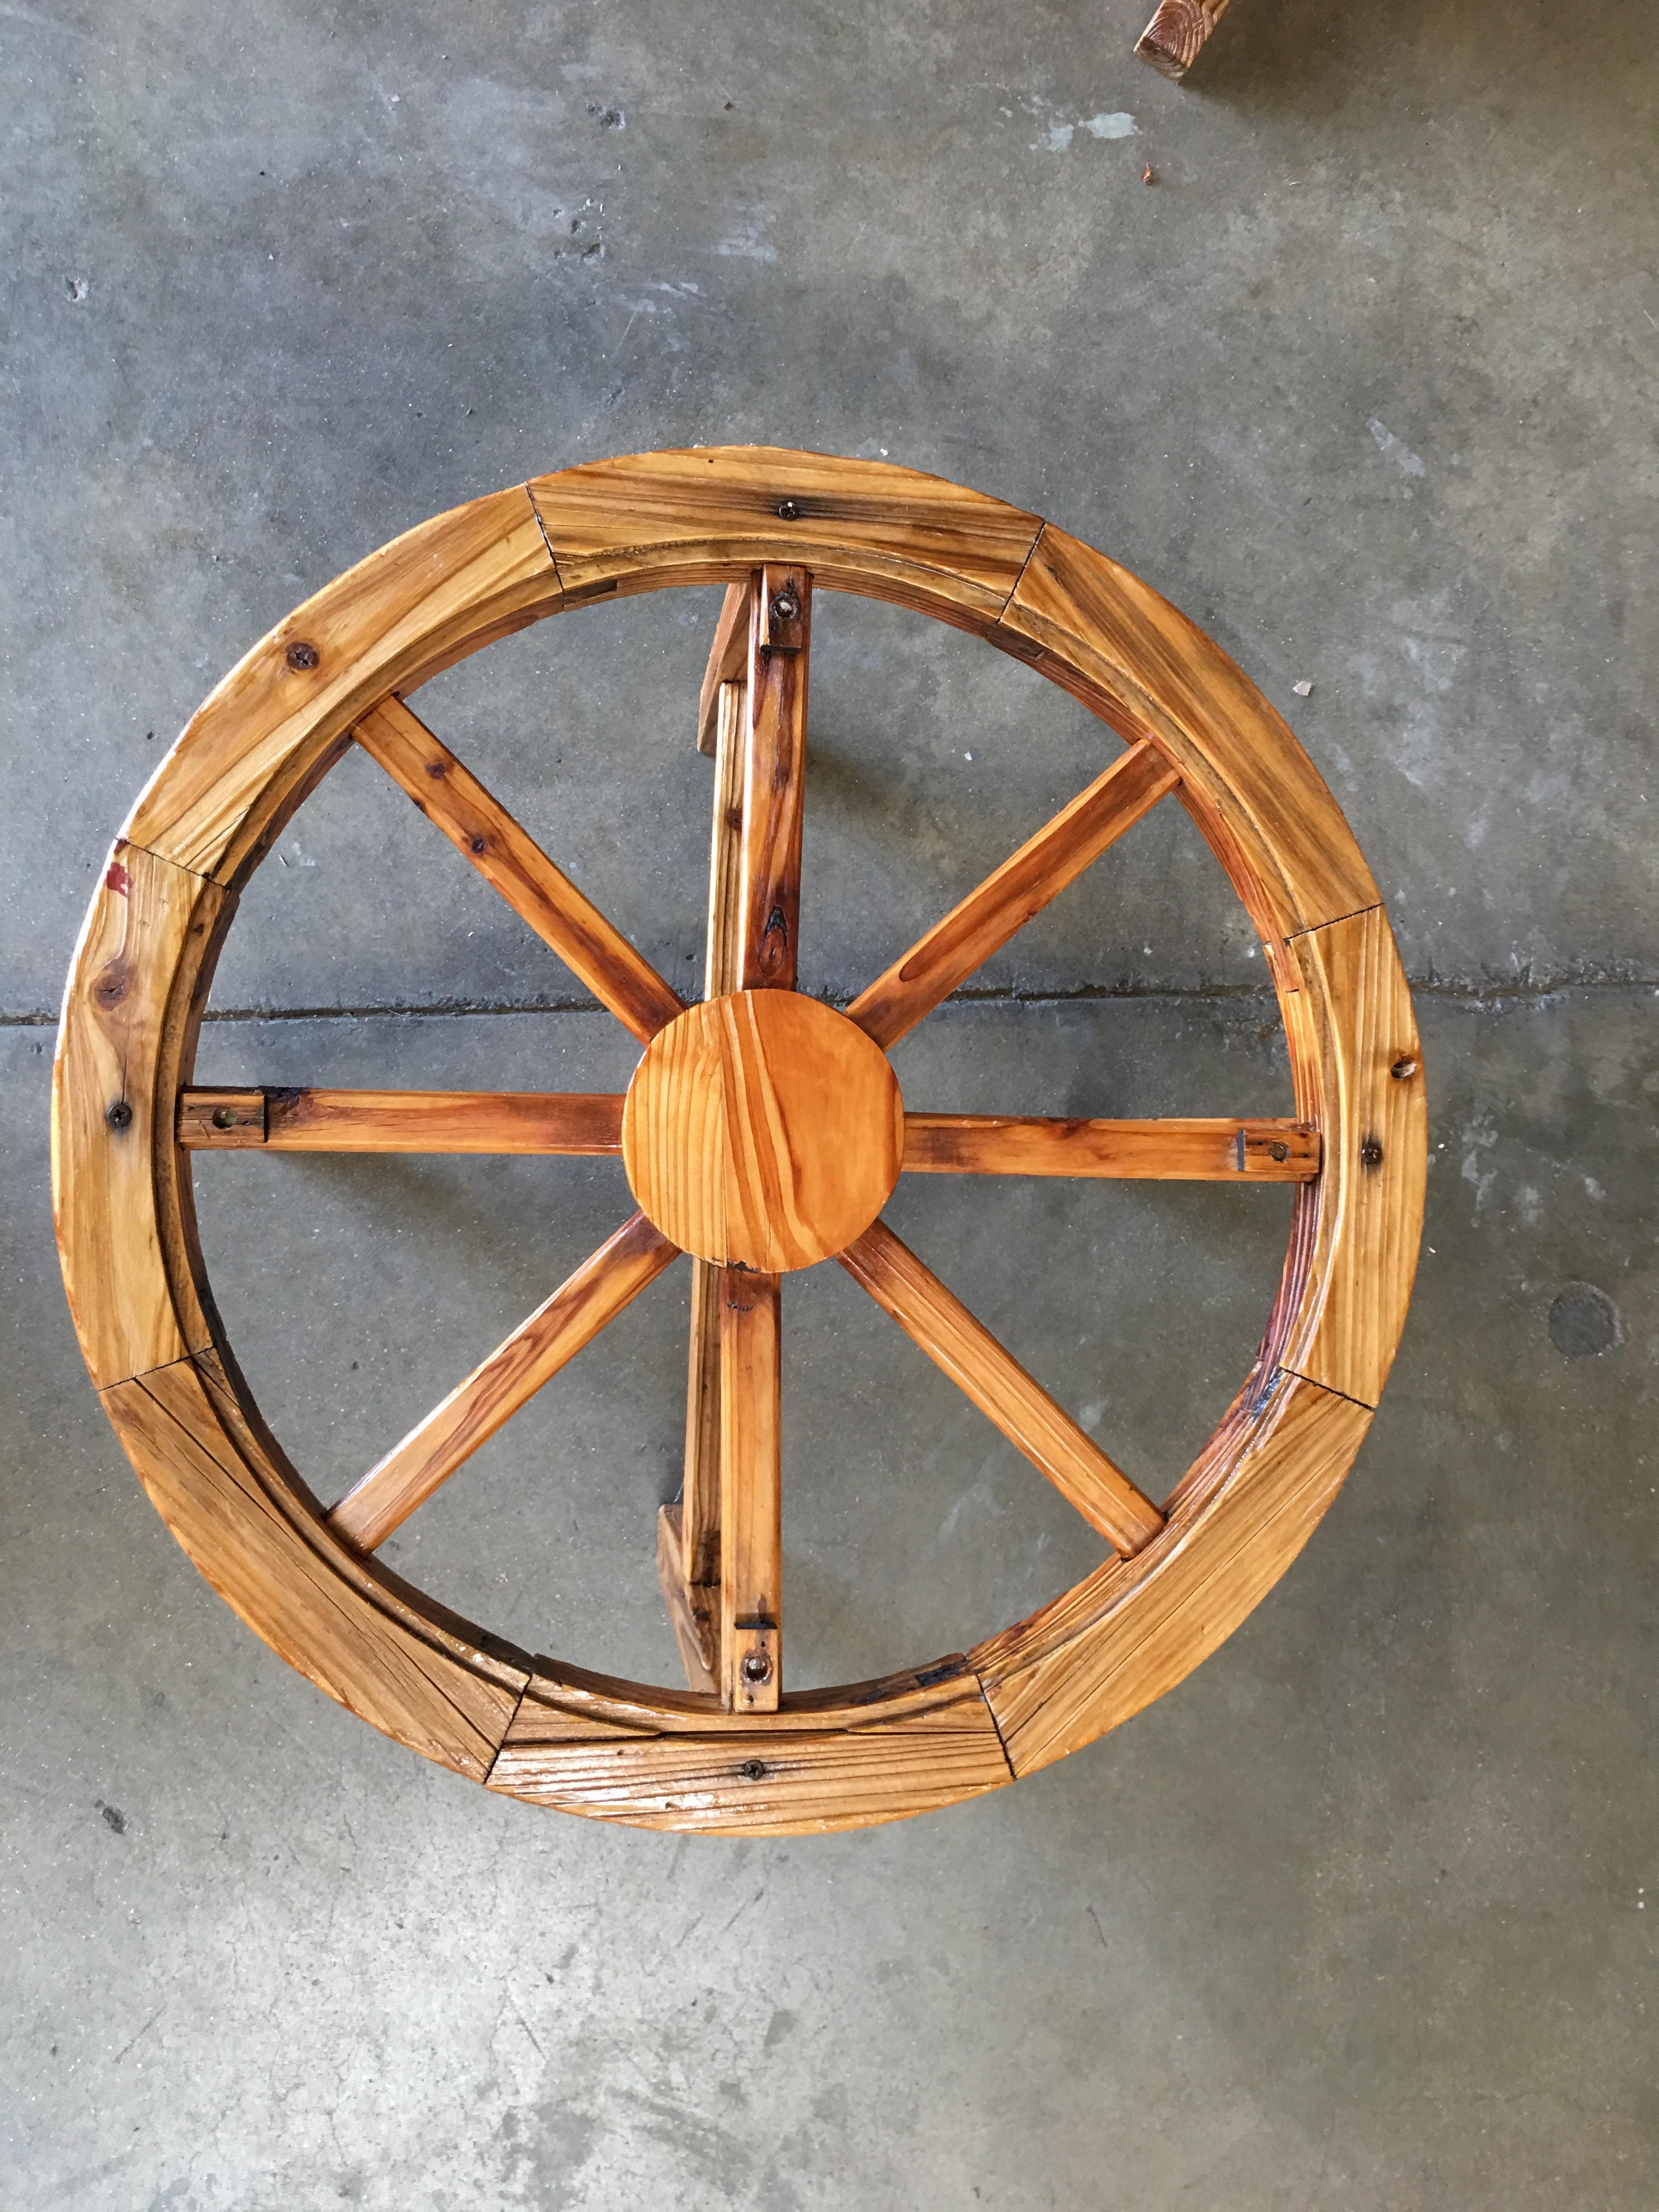 Western Folk Art Wagon Wheel Table and Chairs Set, 1960 For Sale 2